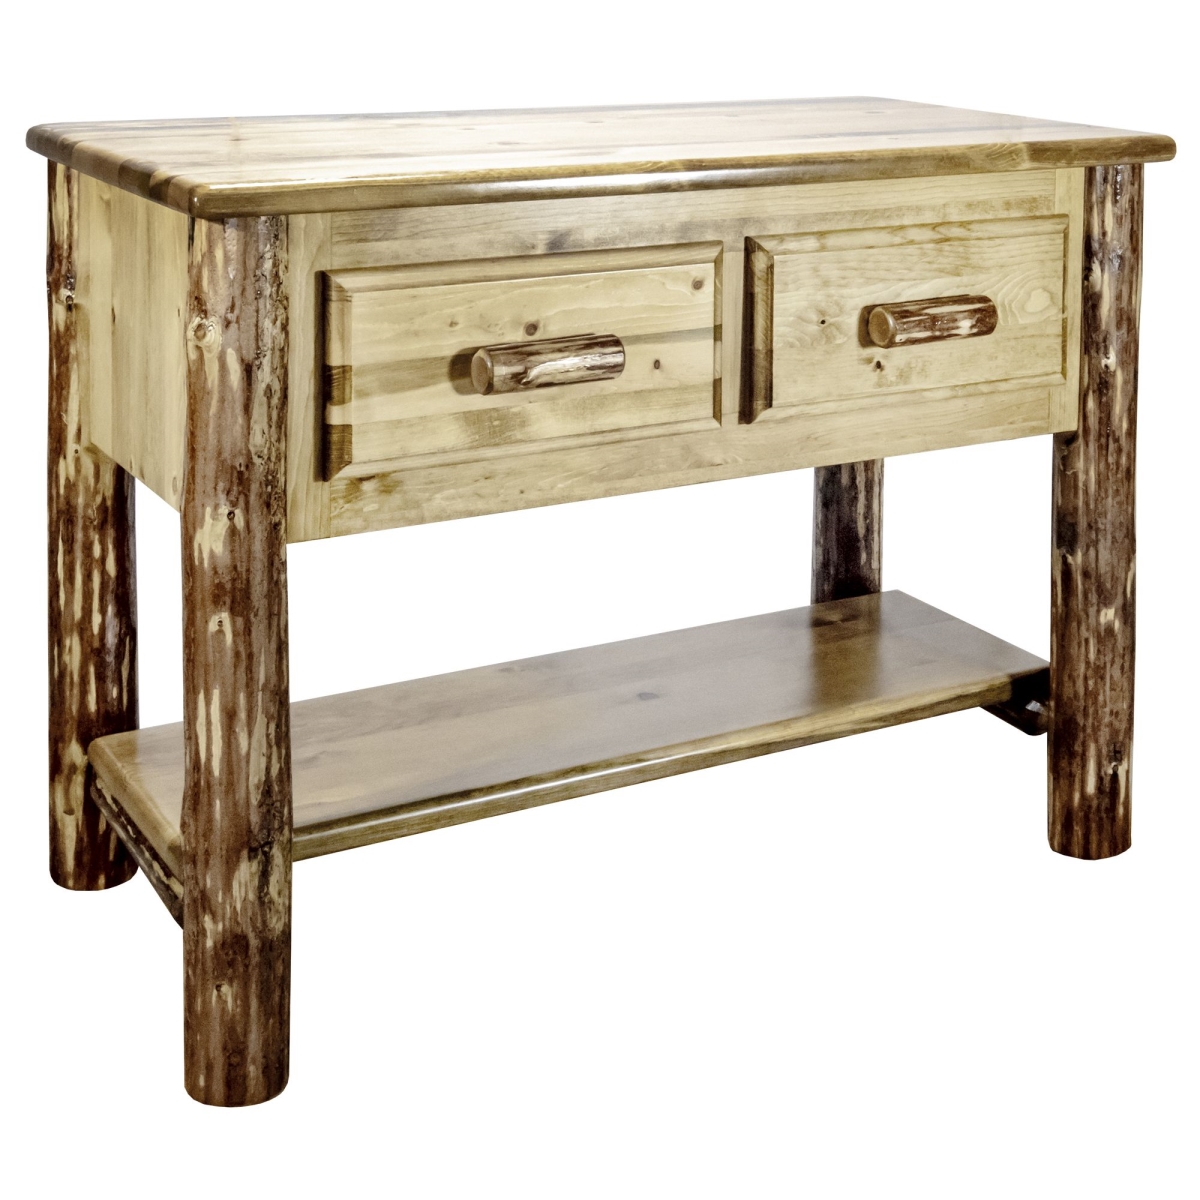 Mwgccontblw2dr Glacier Country Collection Console Table With 2 Drawers - 5.5 X 11.75 X 10.5 In.